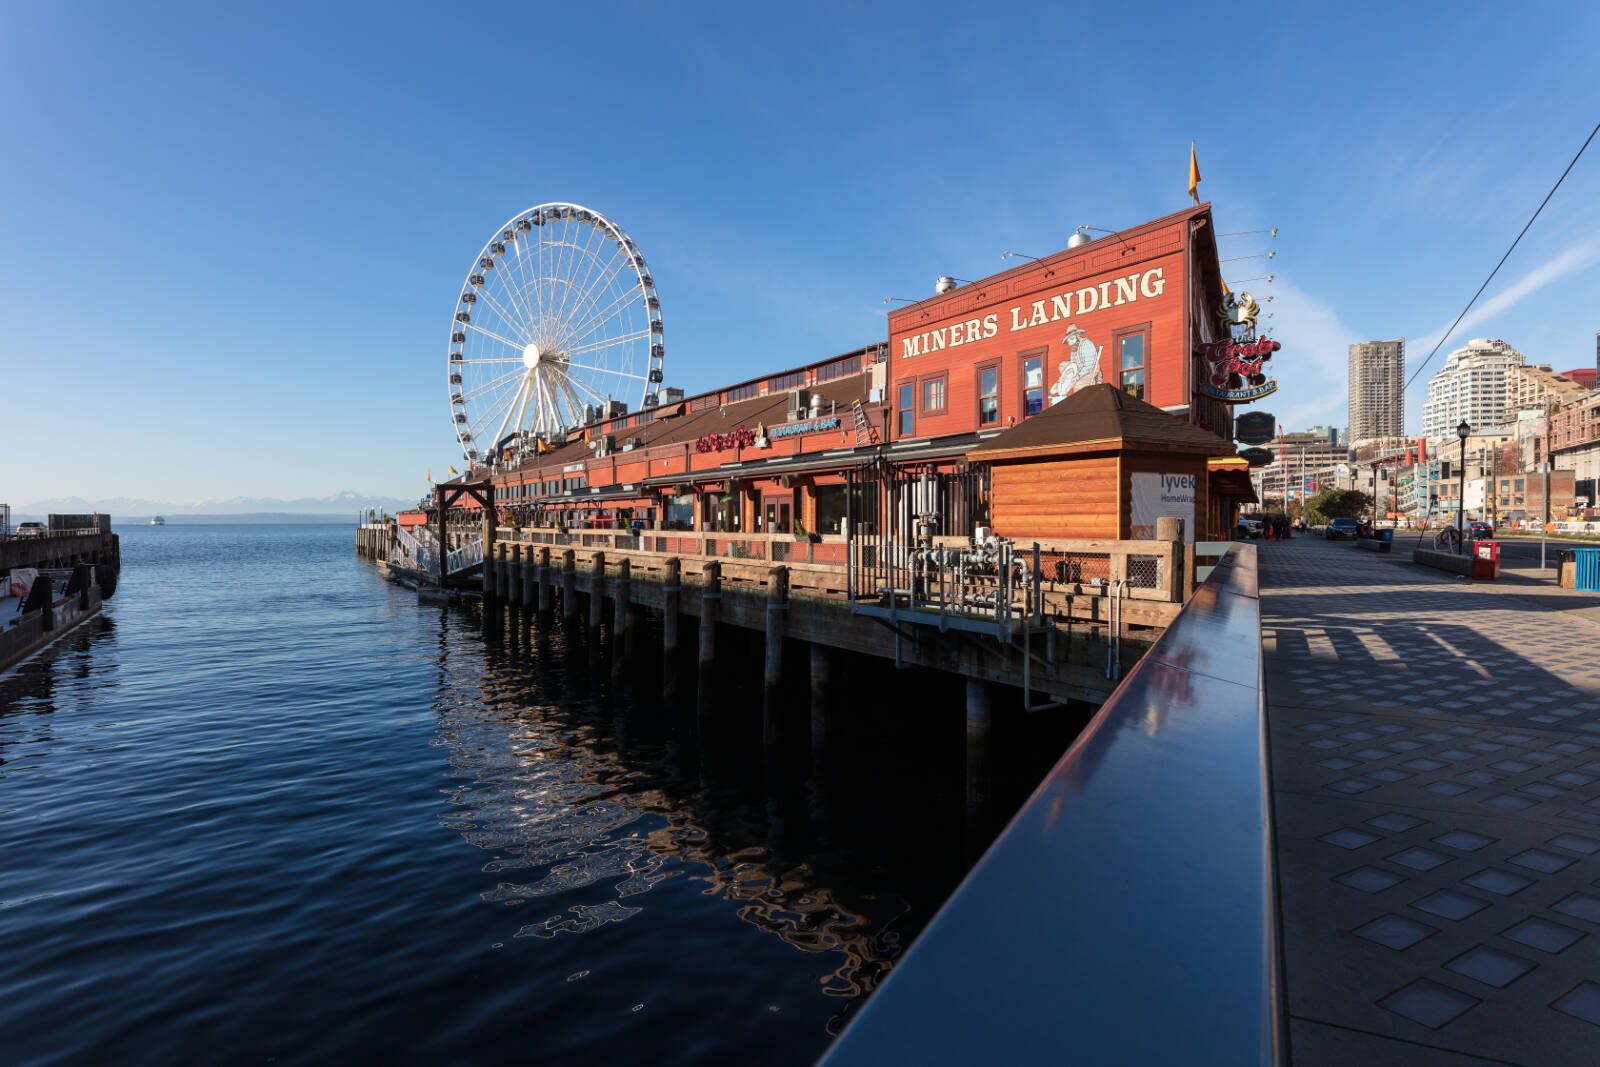 The Great Wheel, a 175-foot Ferris wheel on Pier 57, will lift you up and over Puget Sound.